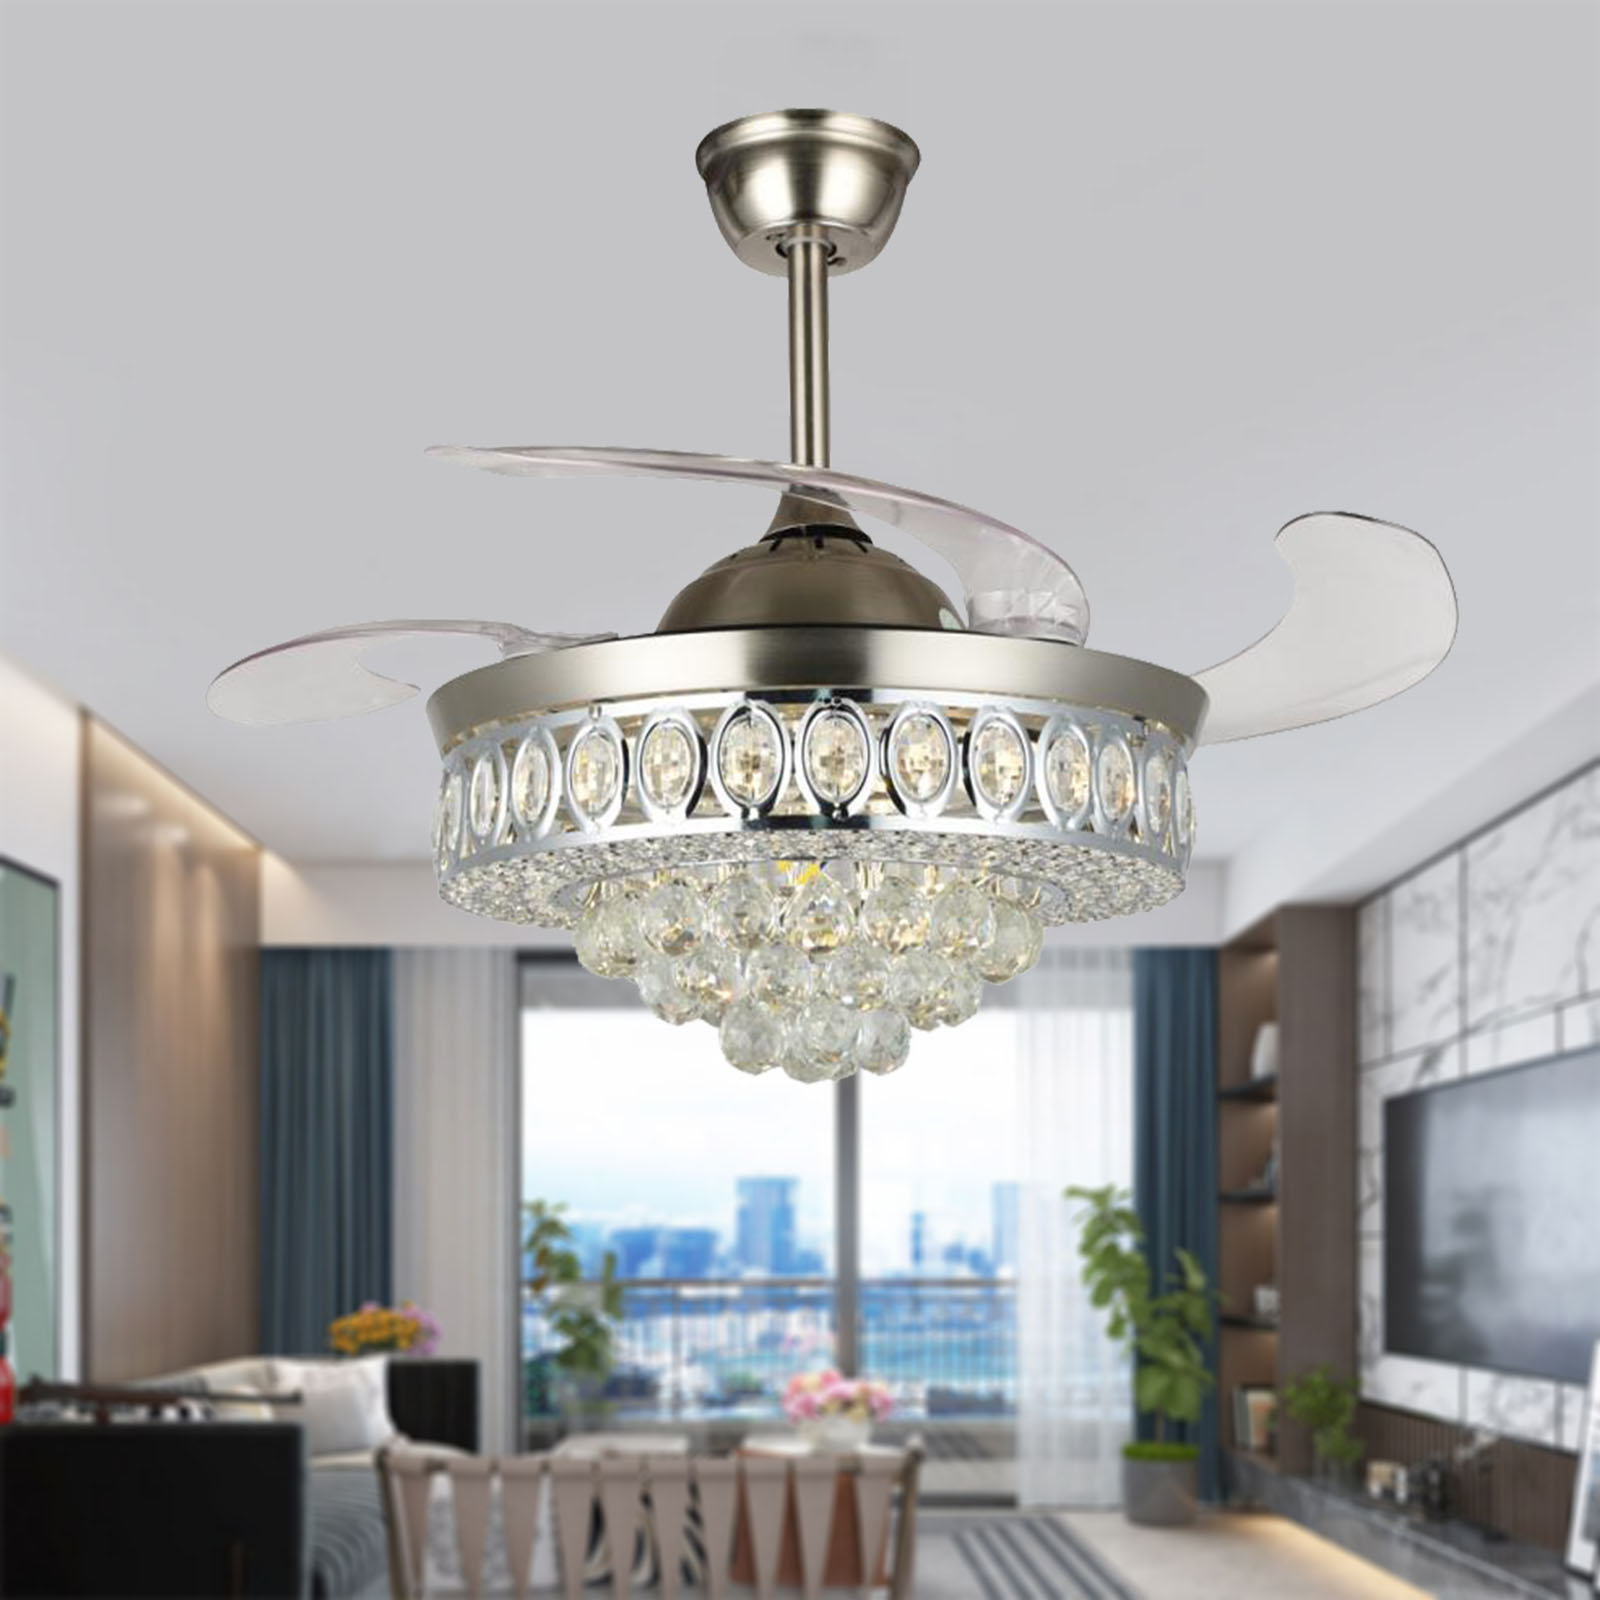 LOW PRICE！！42" Crystal LED Ceiling Fan Light Decor Lamp with 3Retractable Blades 